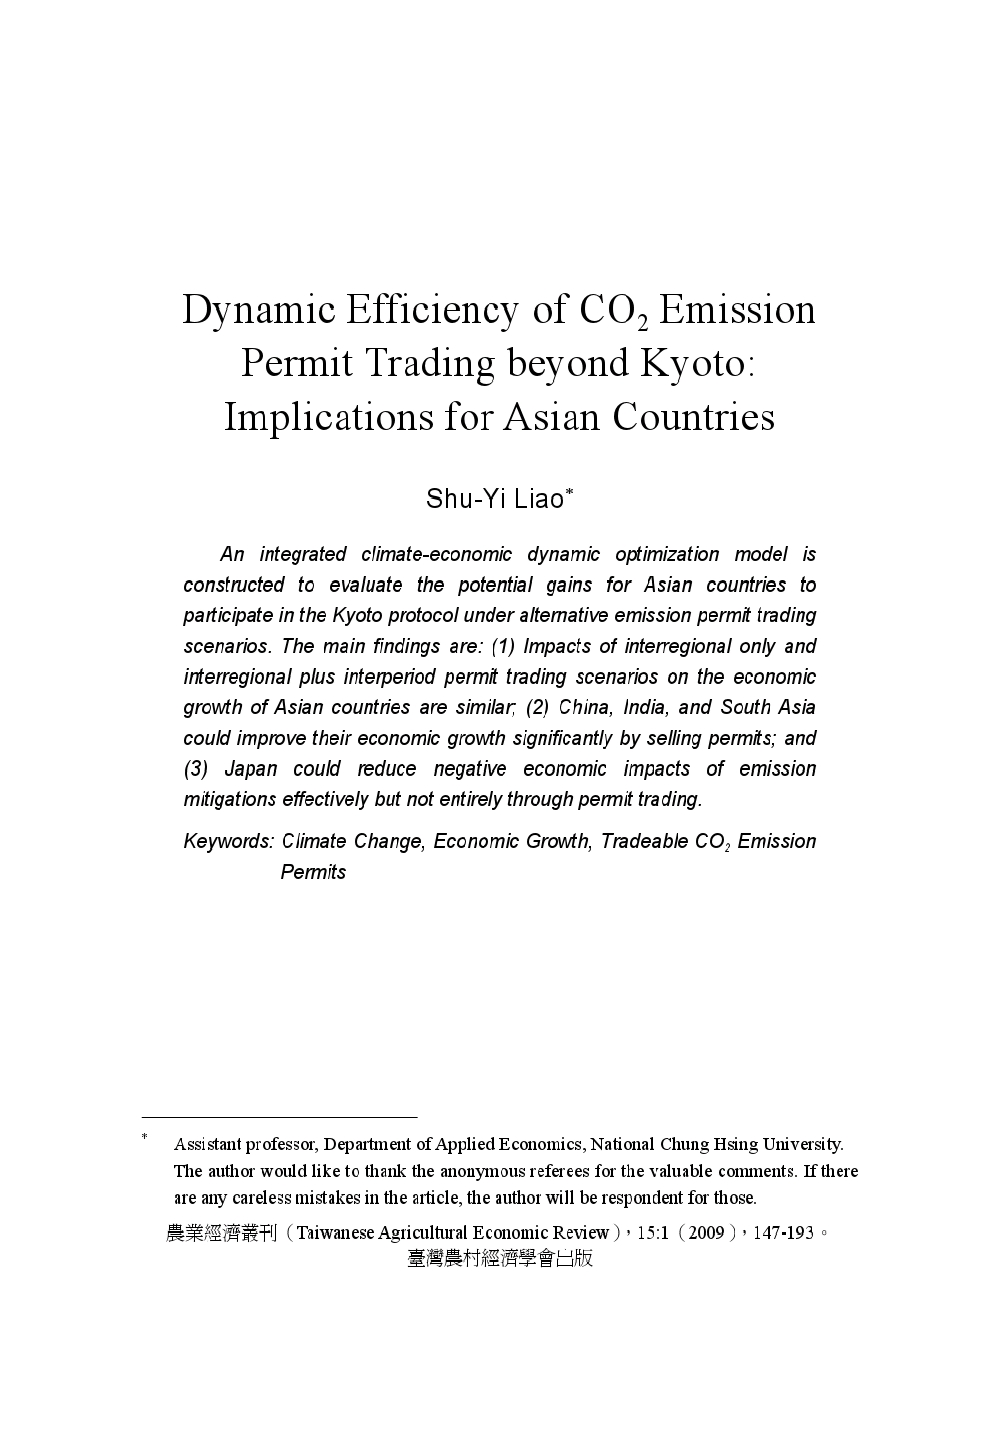 Dynamic_Efficiency_of_CO2_Emission_Permit_Trading_beyond_Kyoto-Implications_for_Asian_Countries.jpg